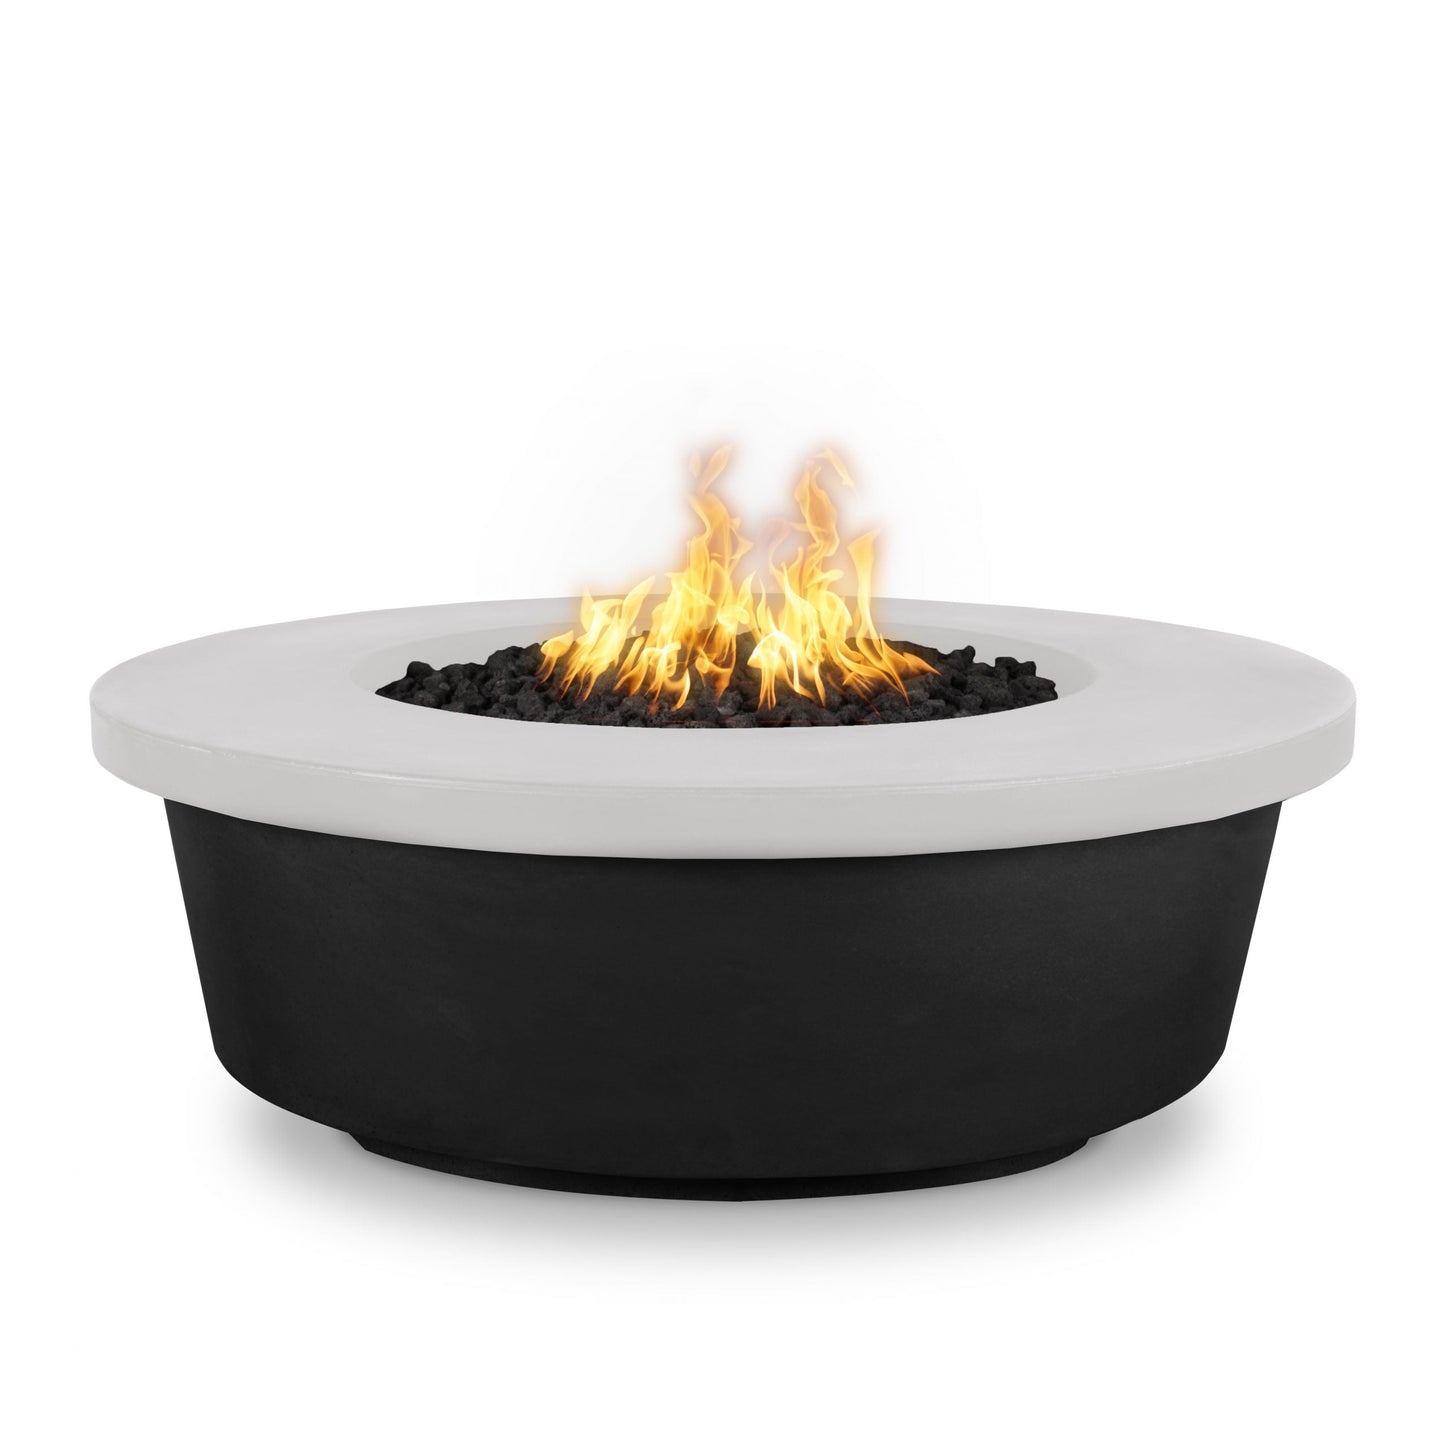 The Outdoor Plus Round Tempe 48" Black & White Powder Coated Liquid Propane Fire Pit with 12V Electronic Ignition